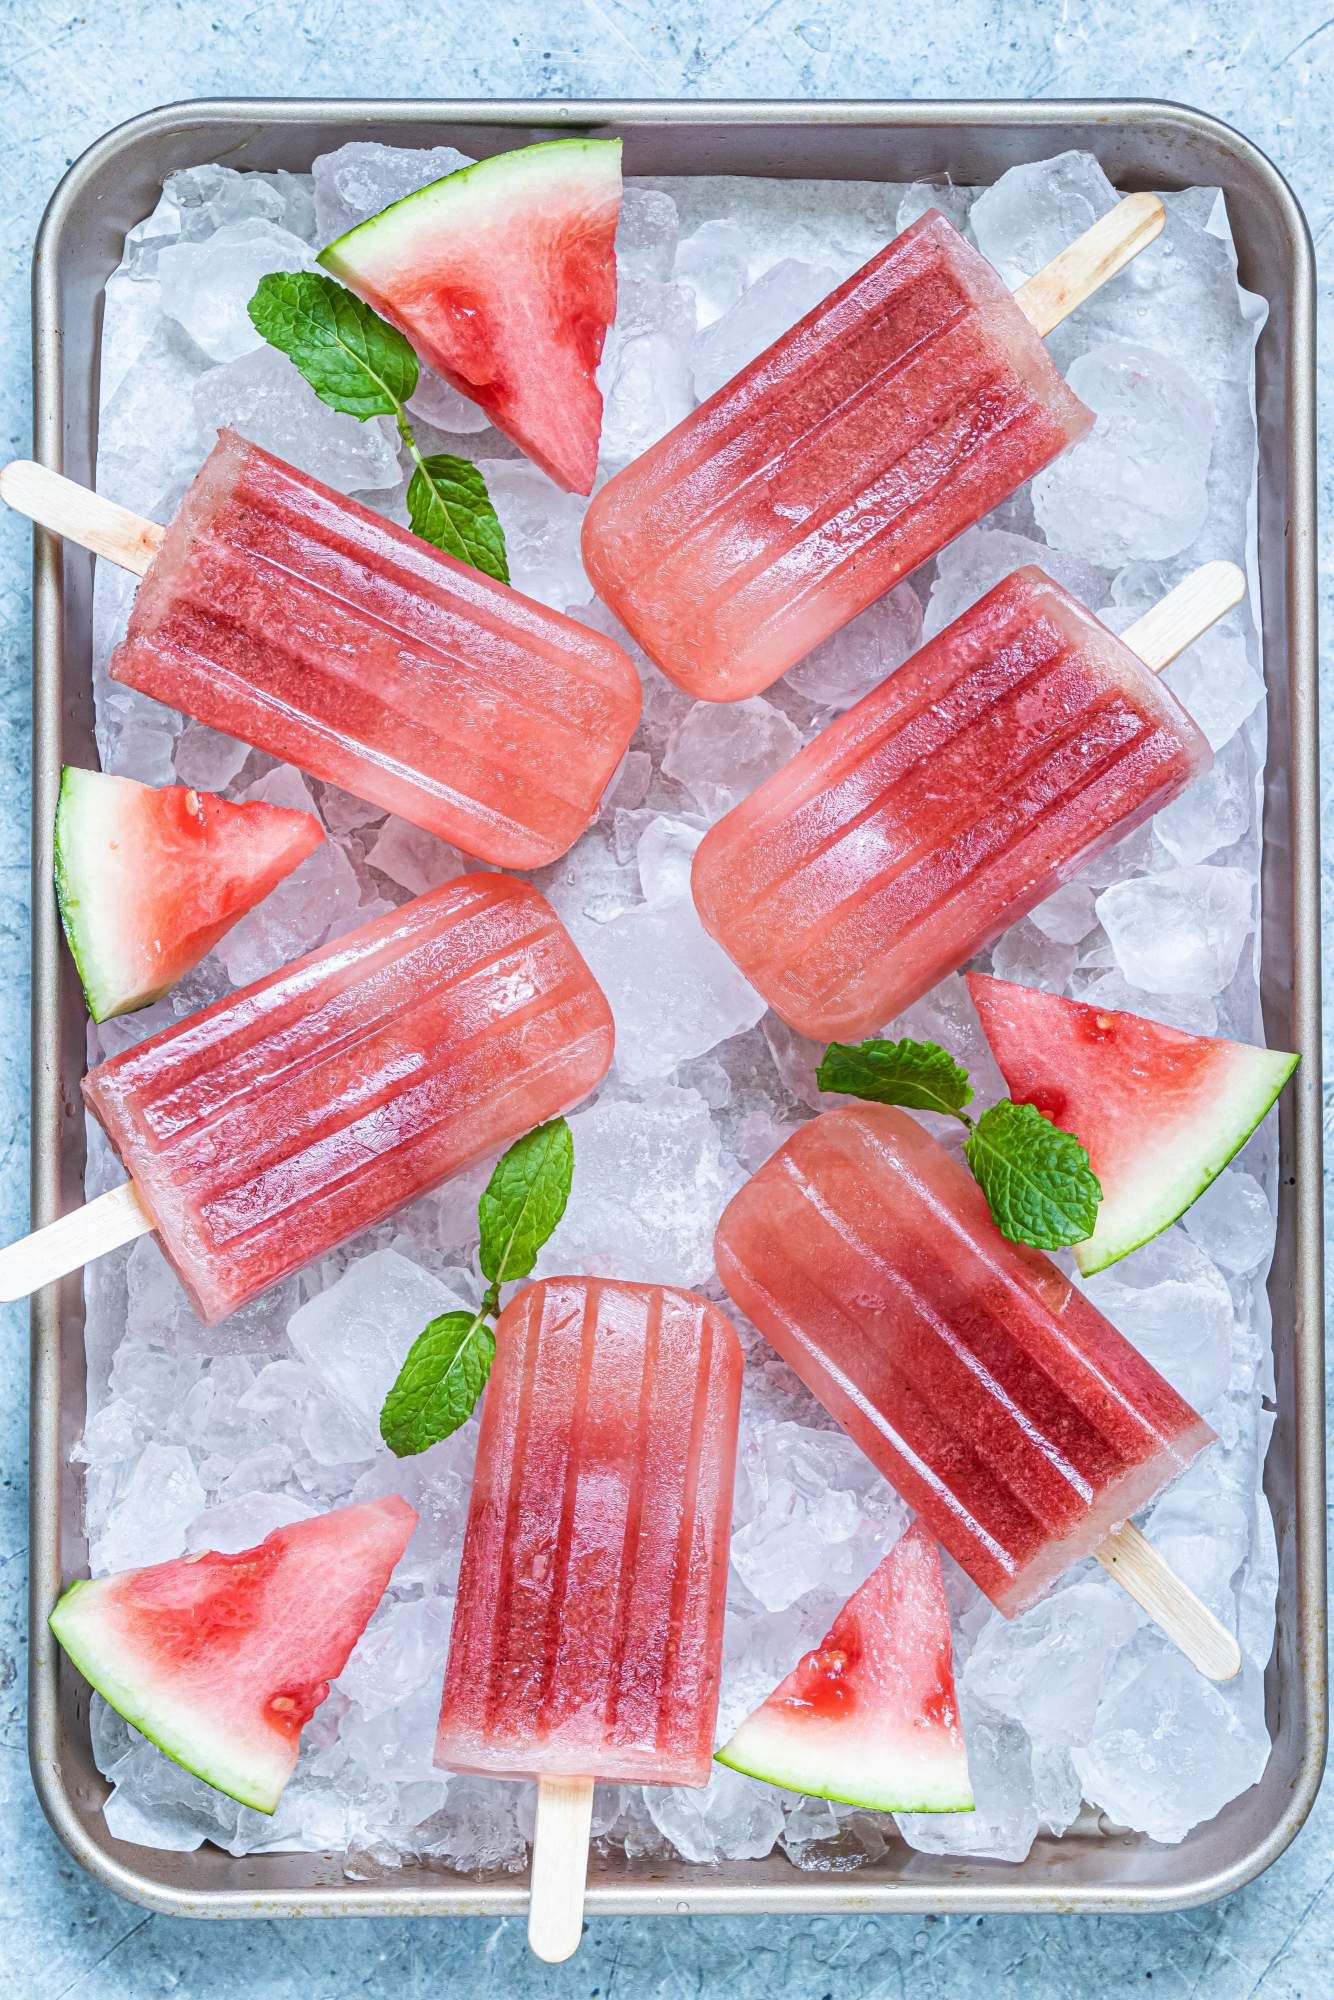 Popsicles with fresh watermelon on a baking sheet with ice cubes, fresh mint, and watermelon.